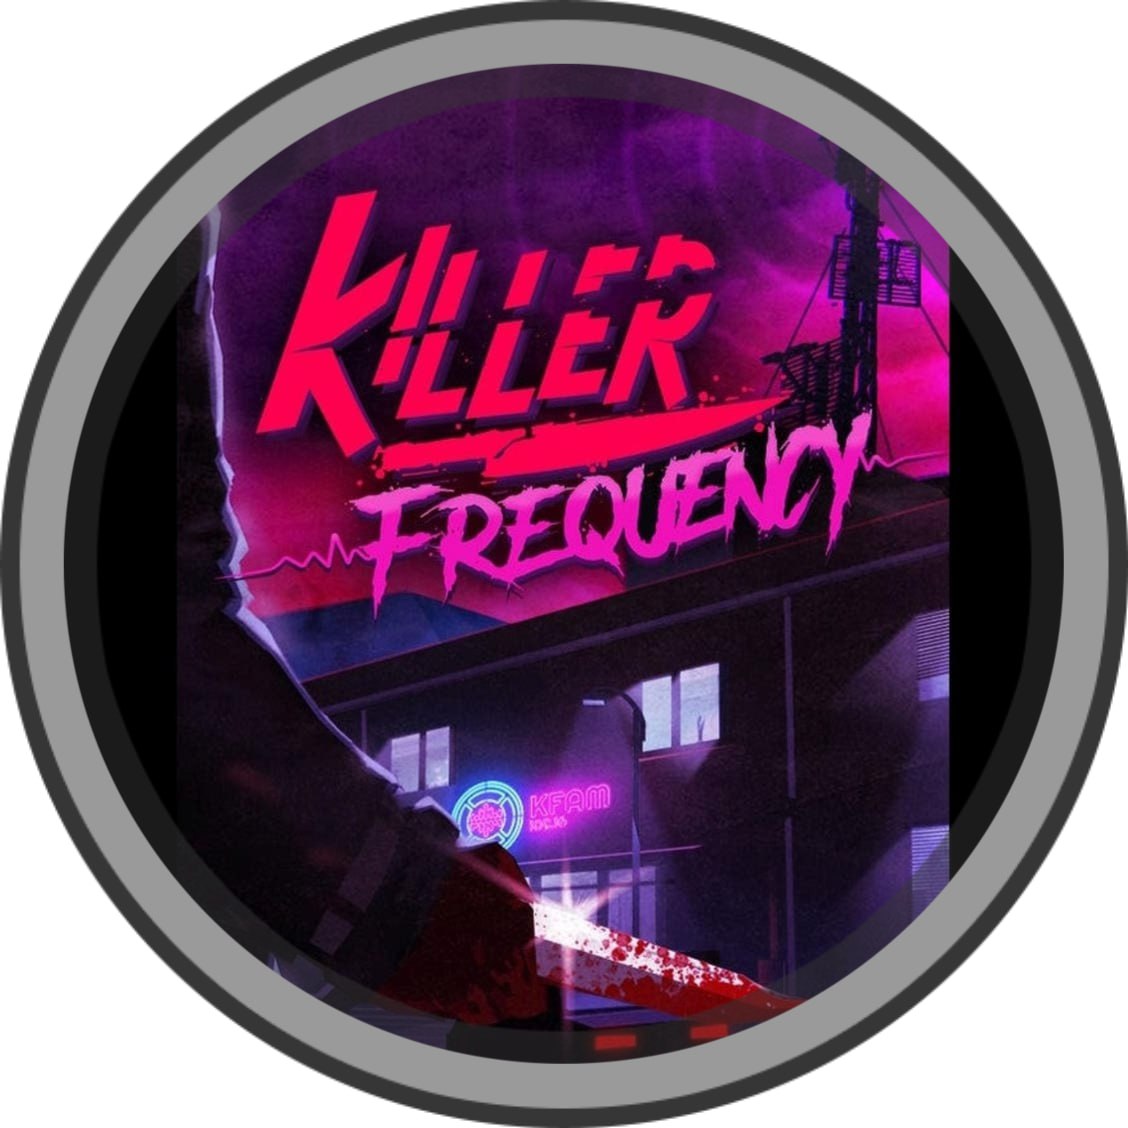 Killer frequency